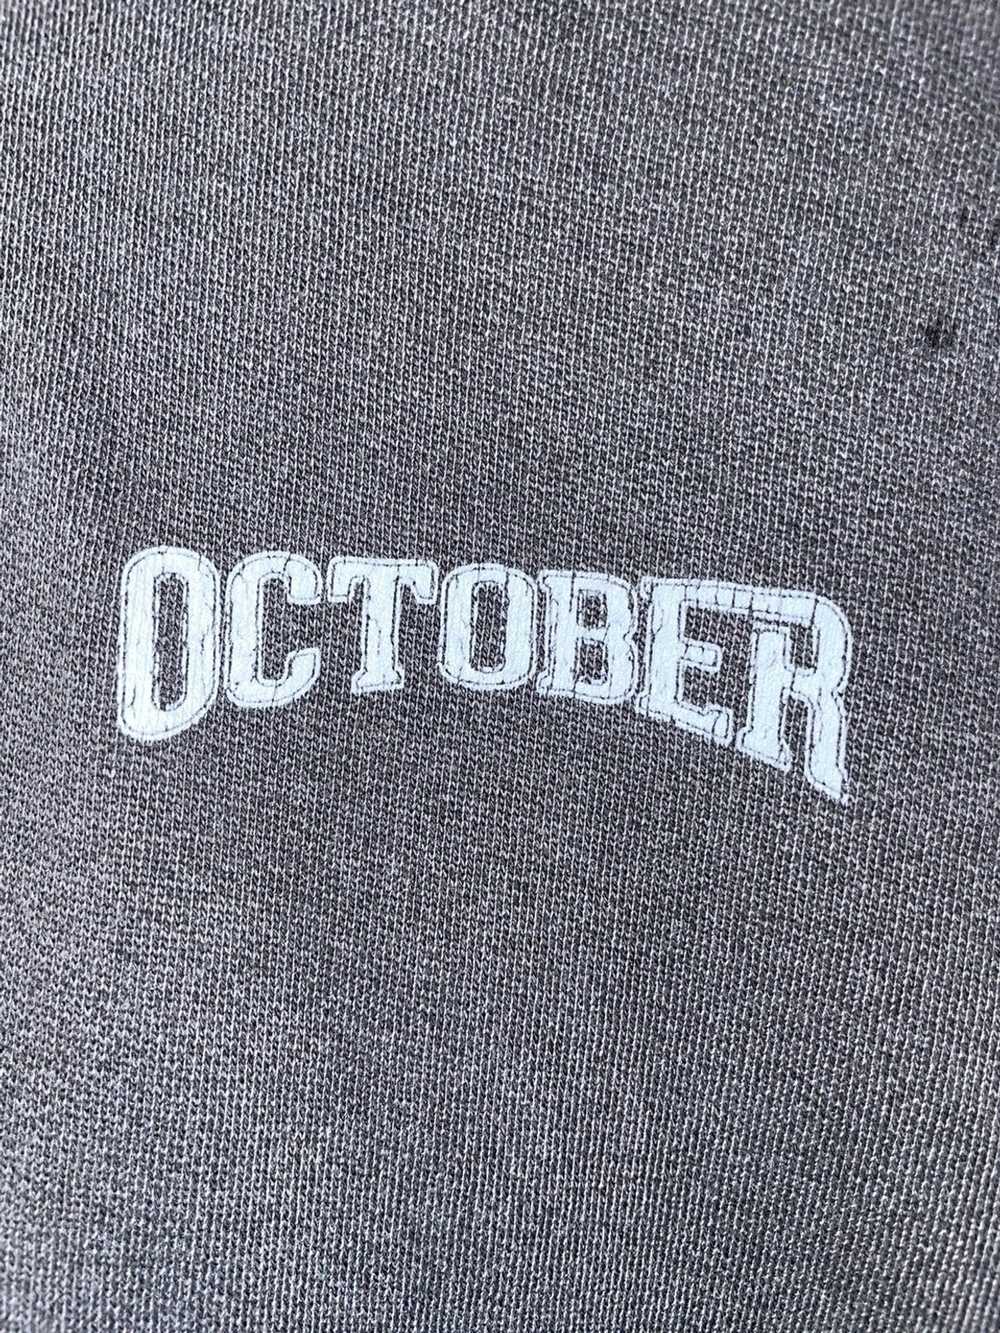 Drake × Octobers Very Own OVO Octobers Very Own T… - image 2